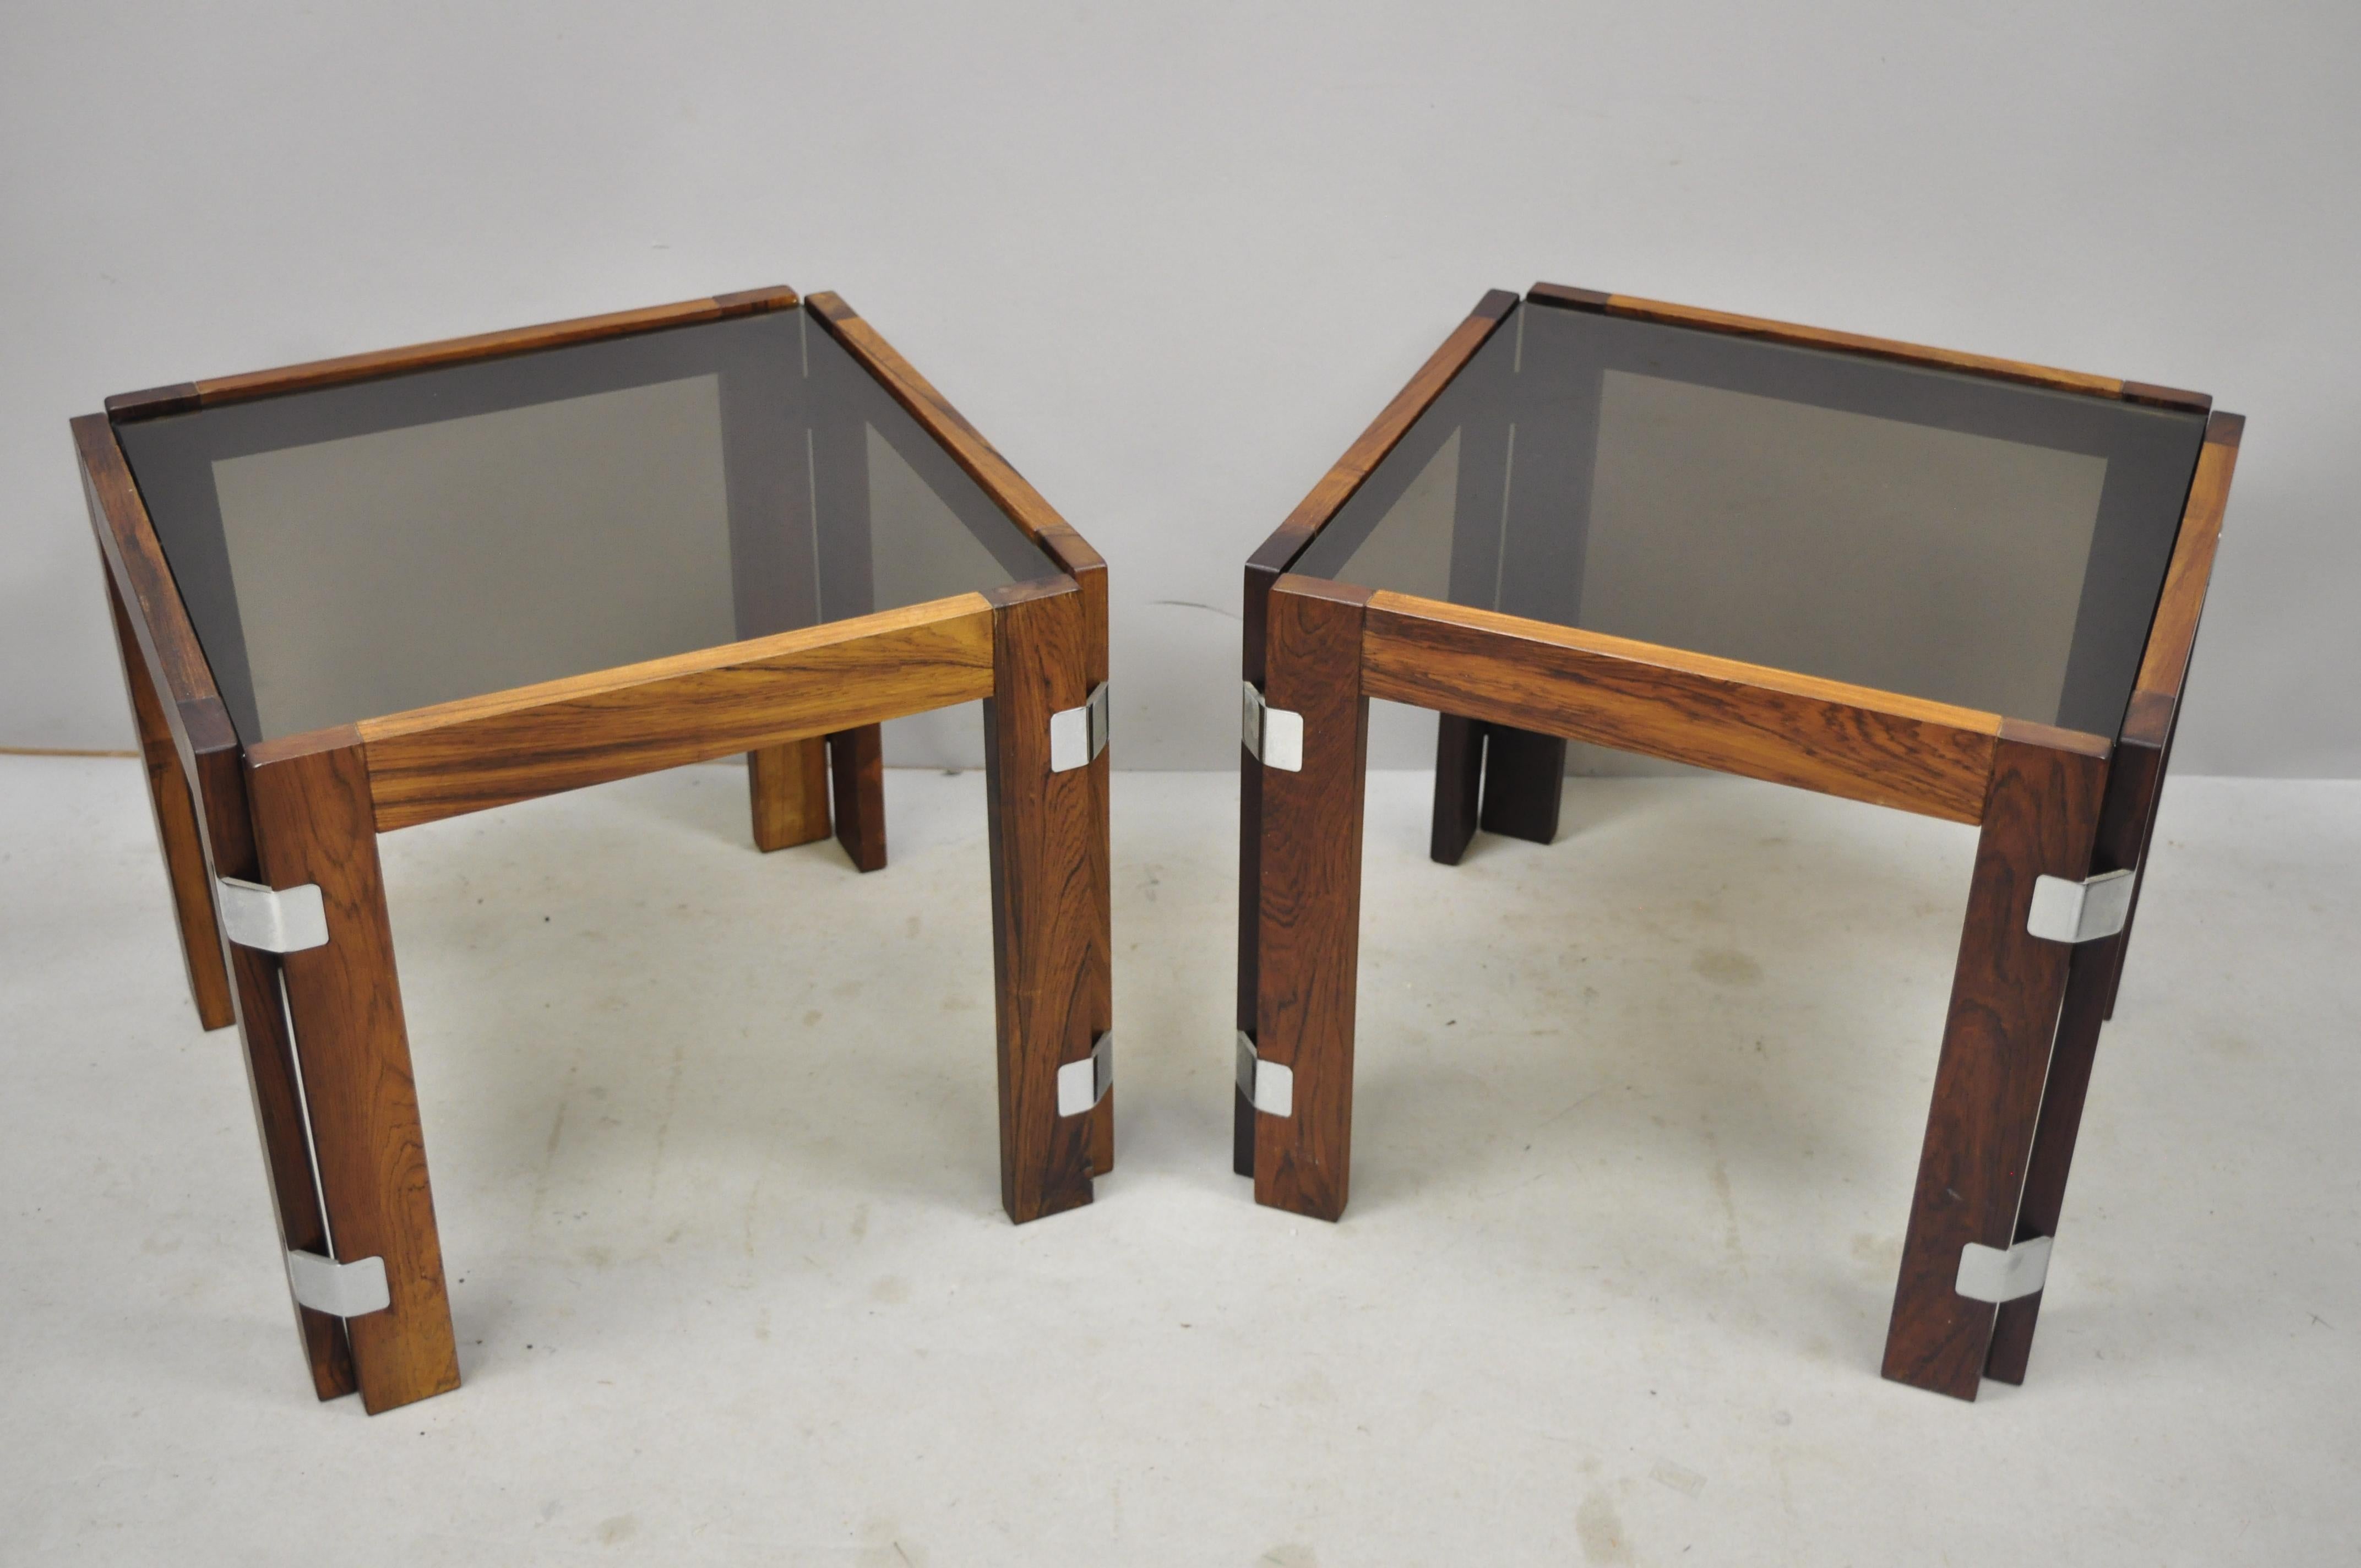 3 Midcentury Danish Modern Rosewood & Smoked Glass Side Tables by Interior Form For Sale 3